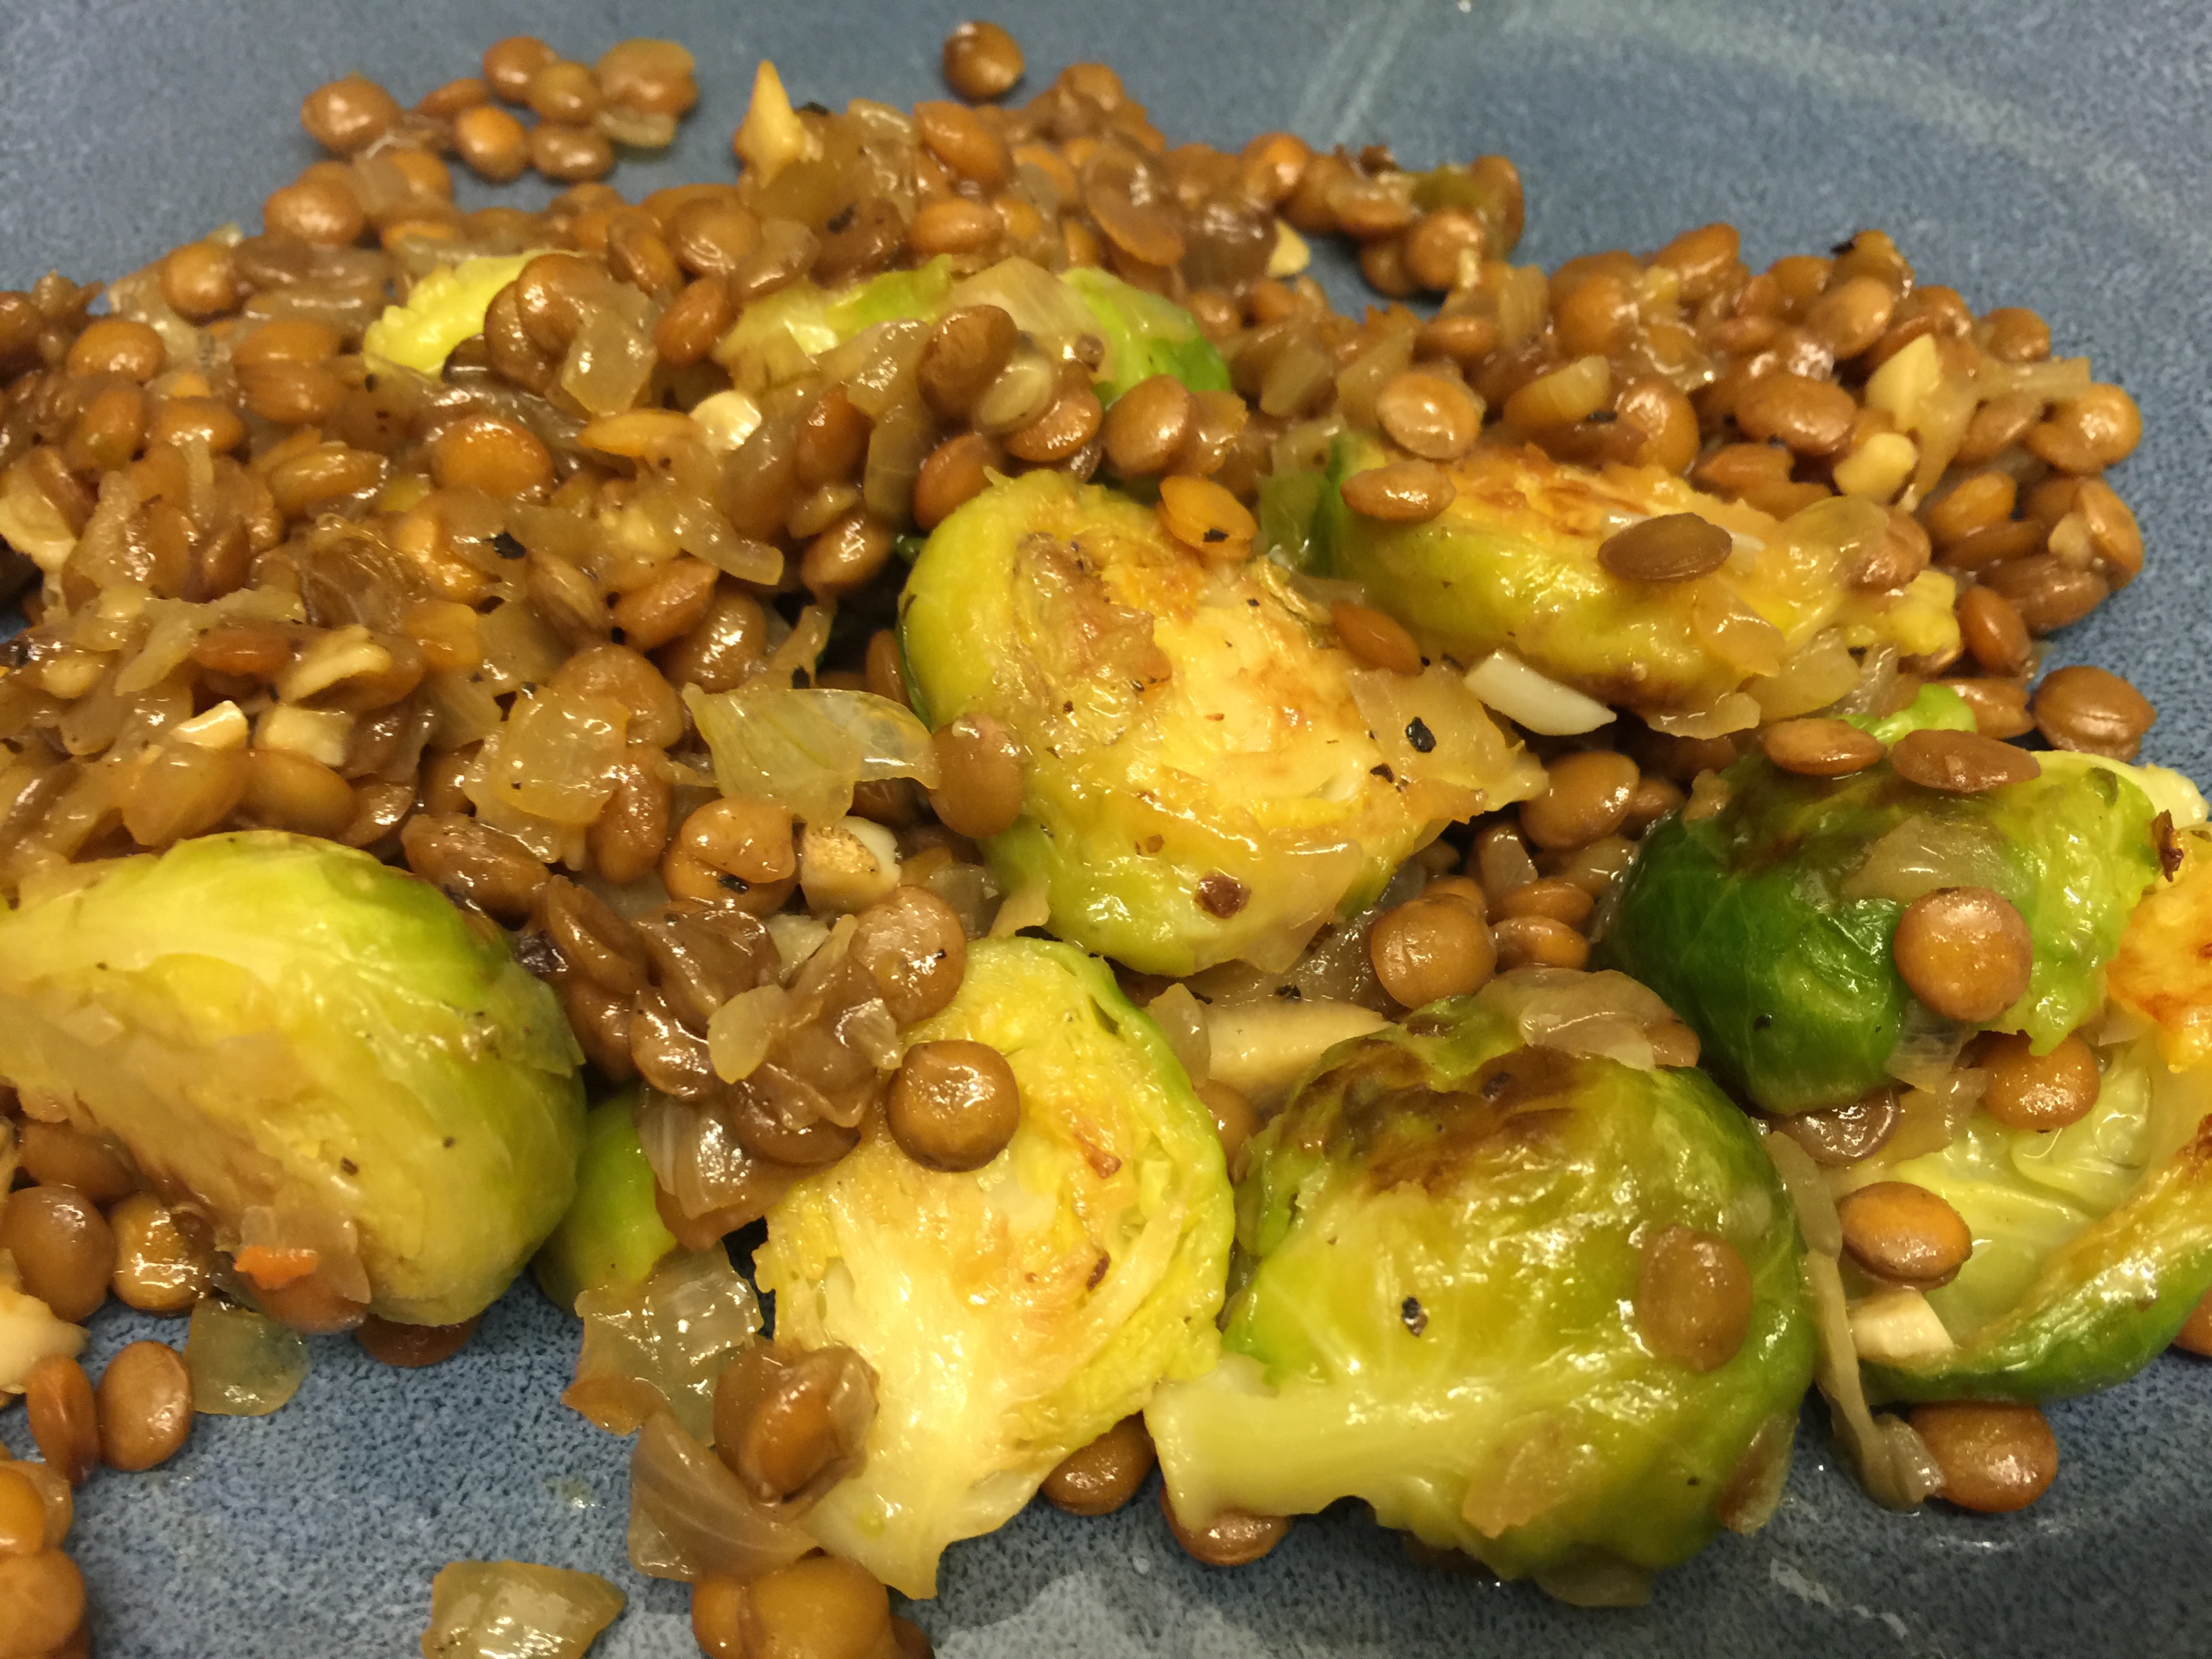 Charred Brussels Sprouts with Lentils